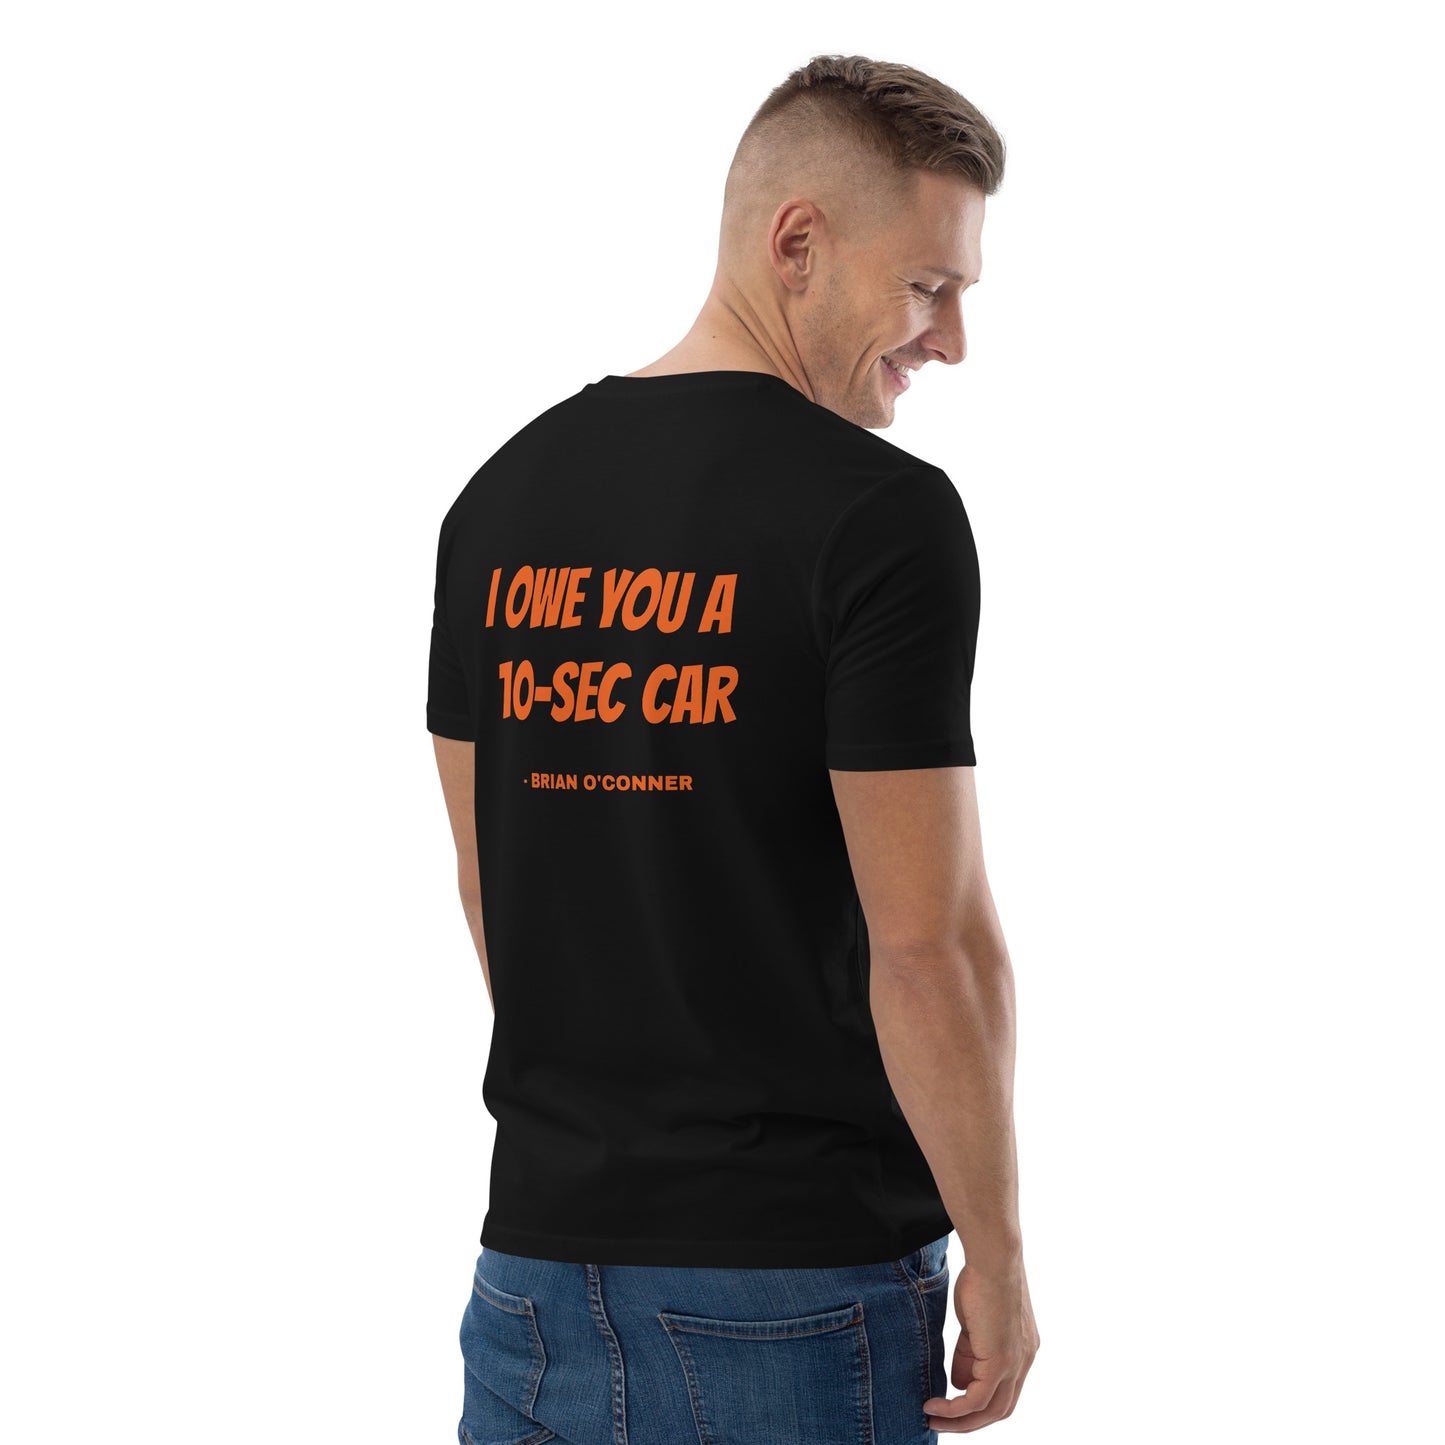 The Fast and Furious Supra T-Shirt